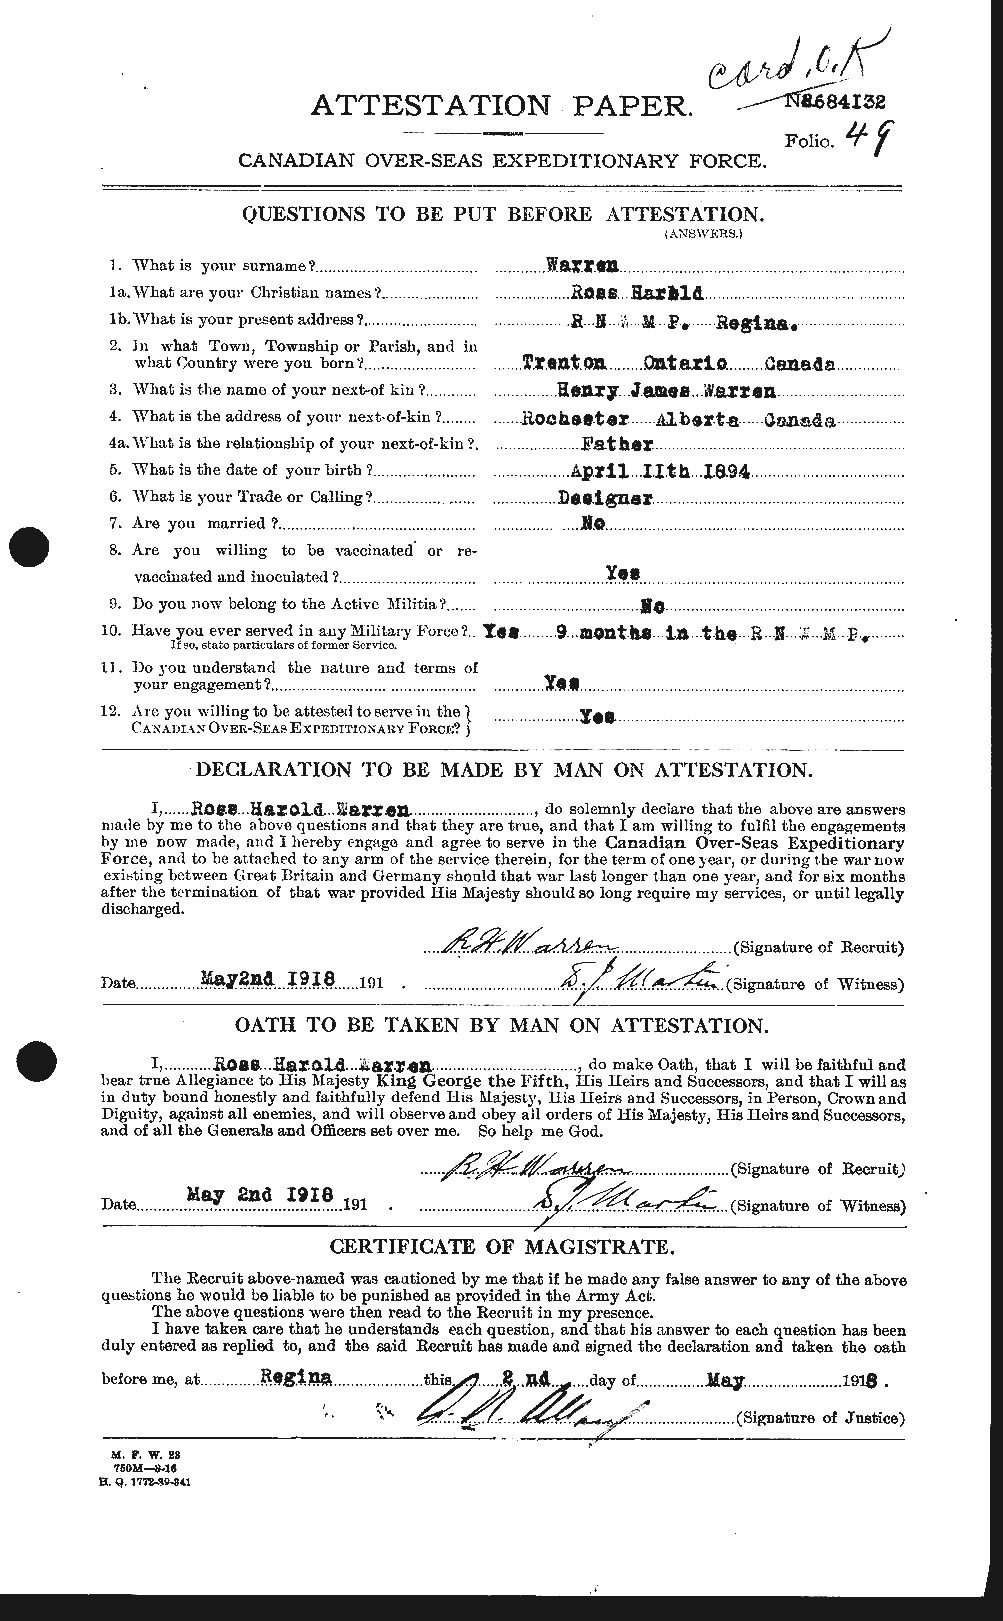 Personnel Records of the First World War - CEF 658628a